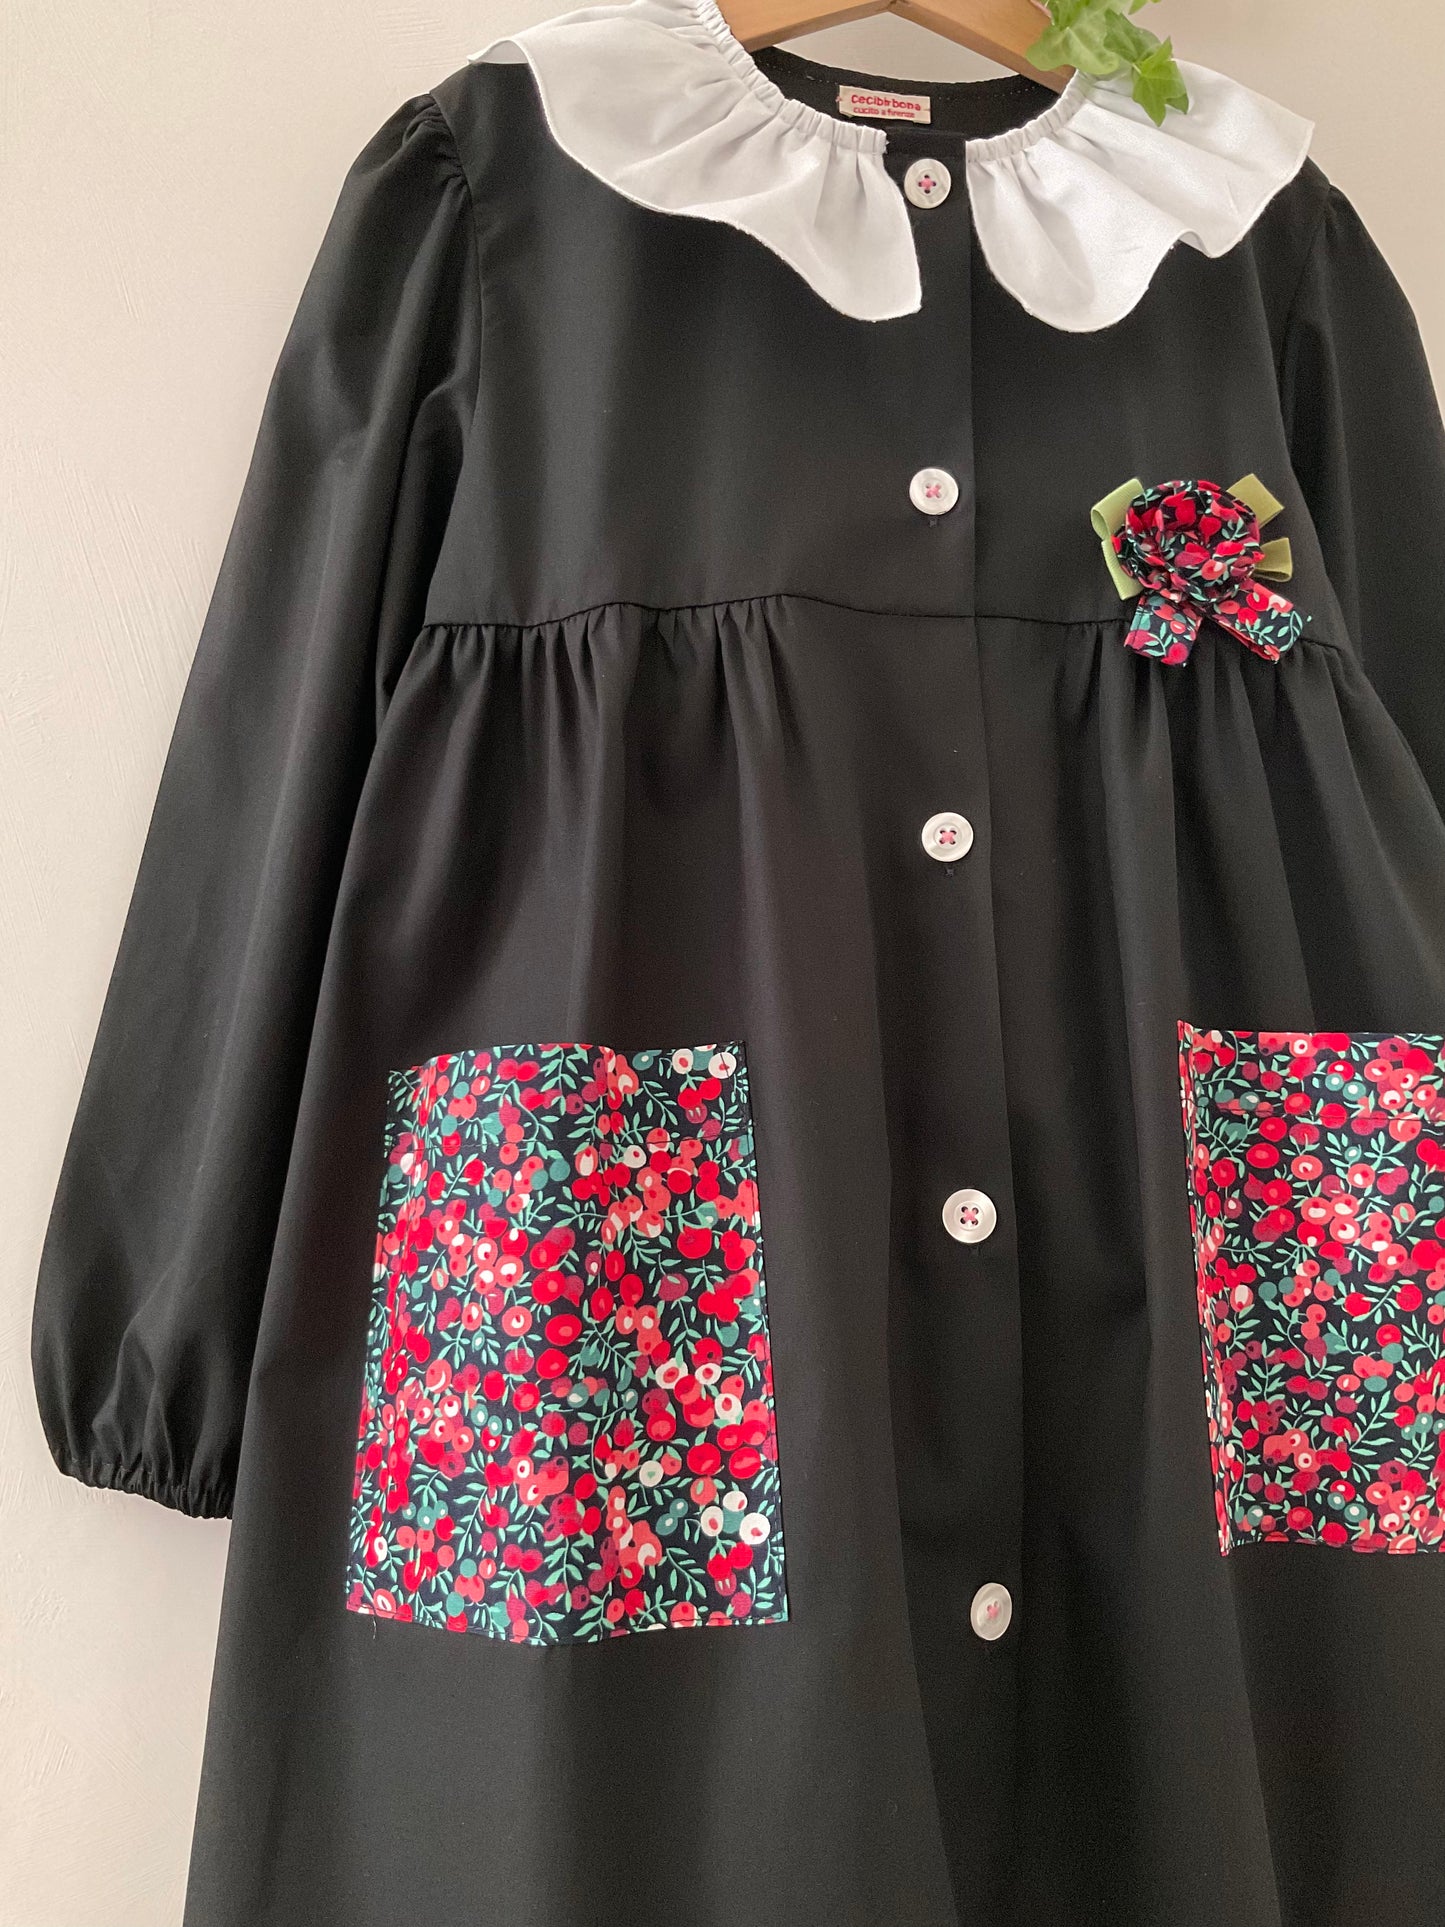 The black apron with red flowers and pierrot collar for primary school